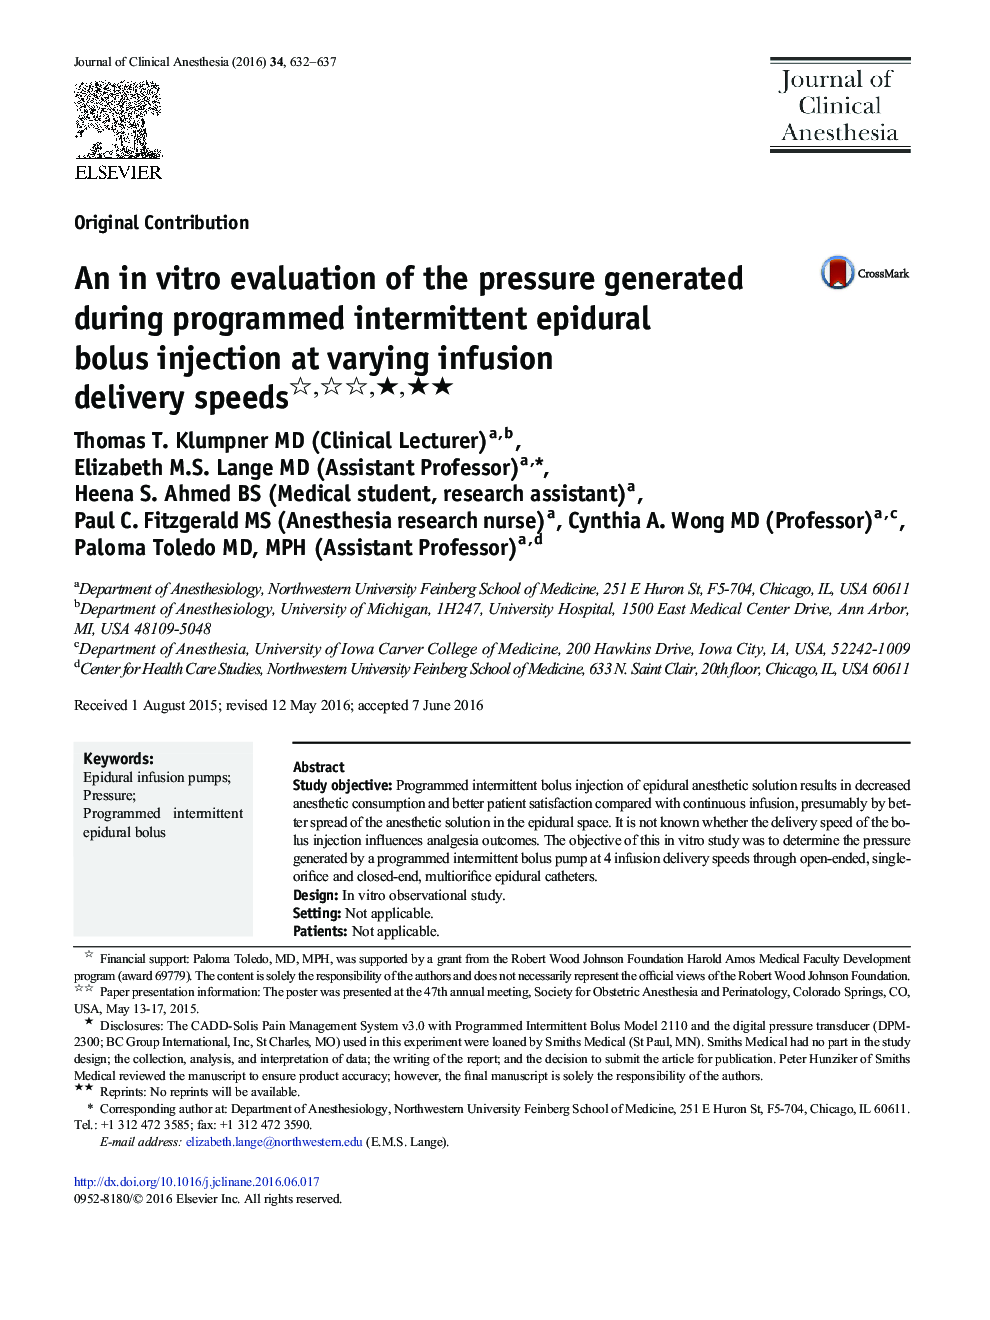 An in vitro evaluation of the pressure generated during programmed intermittent epidural bolus injection at varying infusion delivery speeds